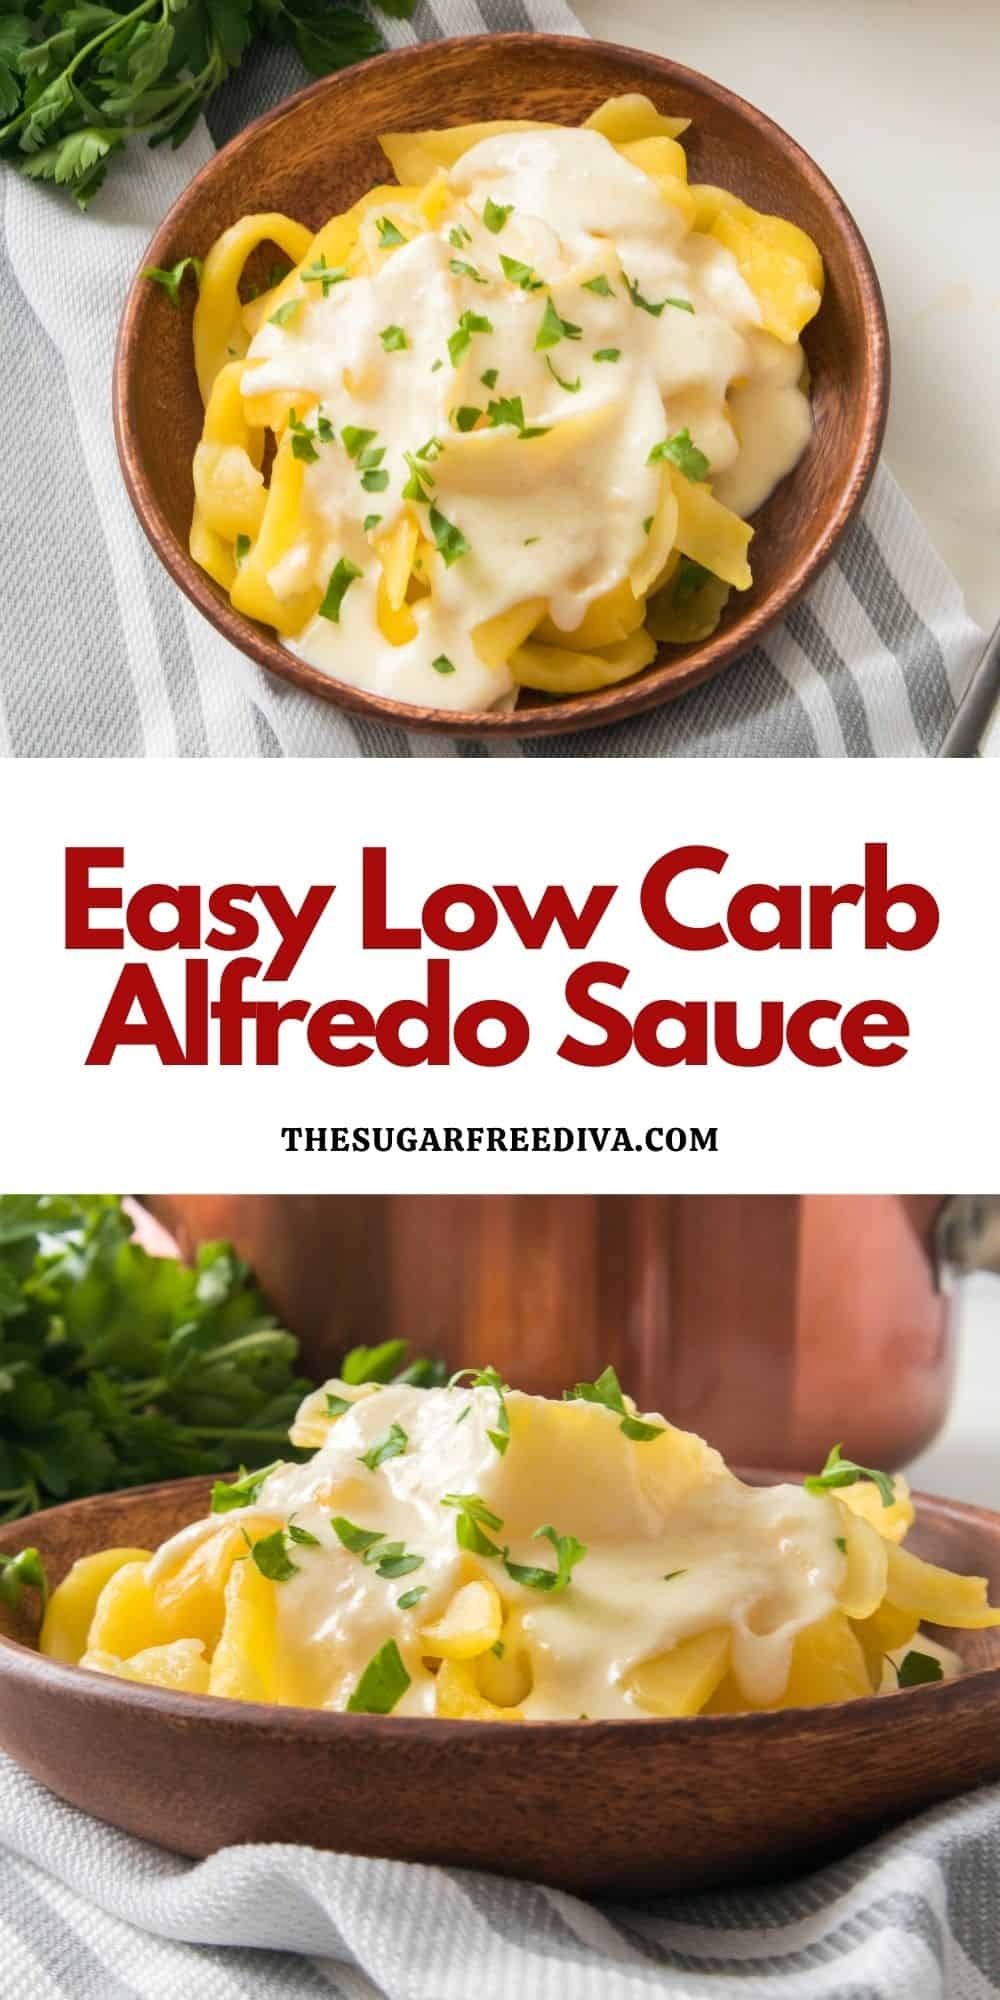 Easy Low Carb Alfredo Sauce, a simple five ingredient recipe for keto low carb white sauce for a low carb pasta meal.